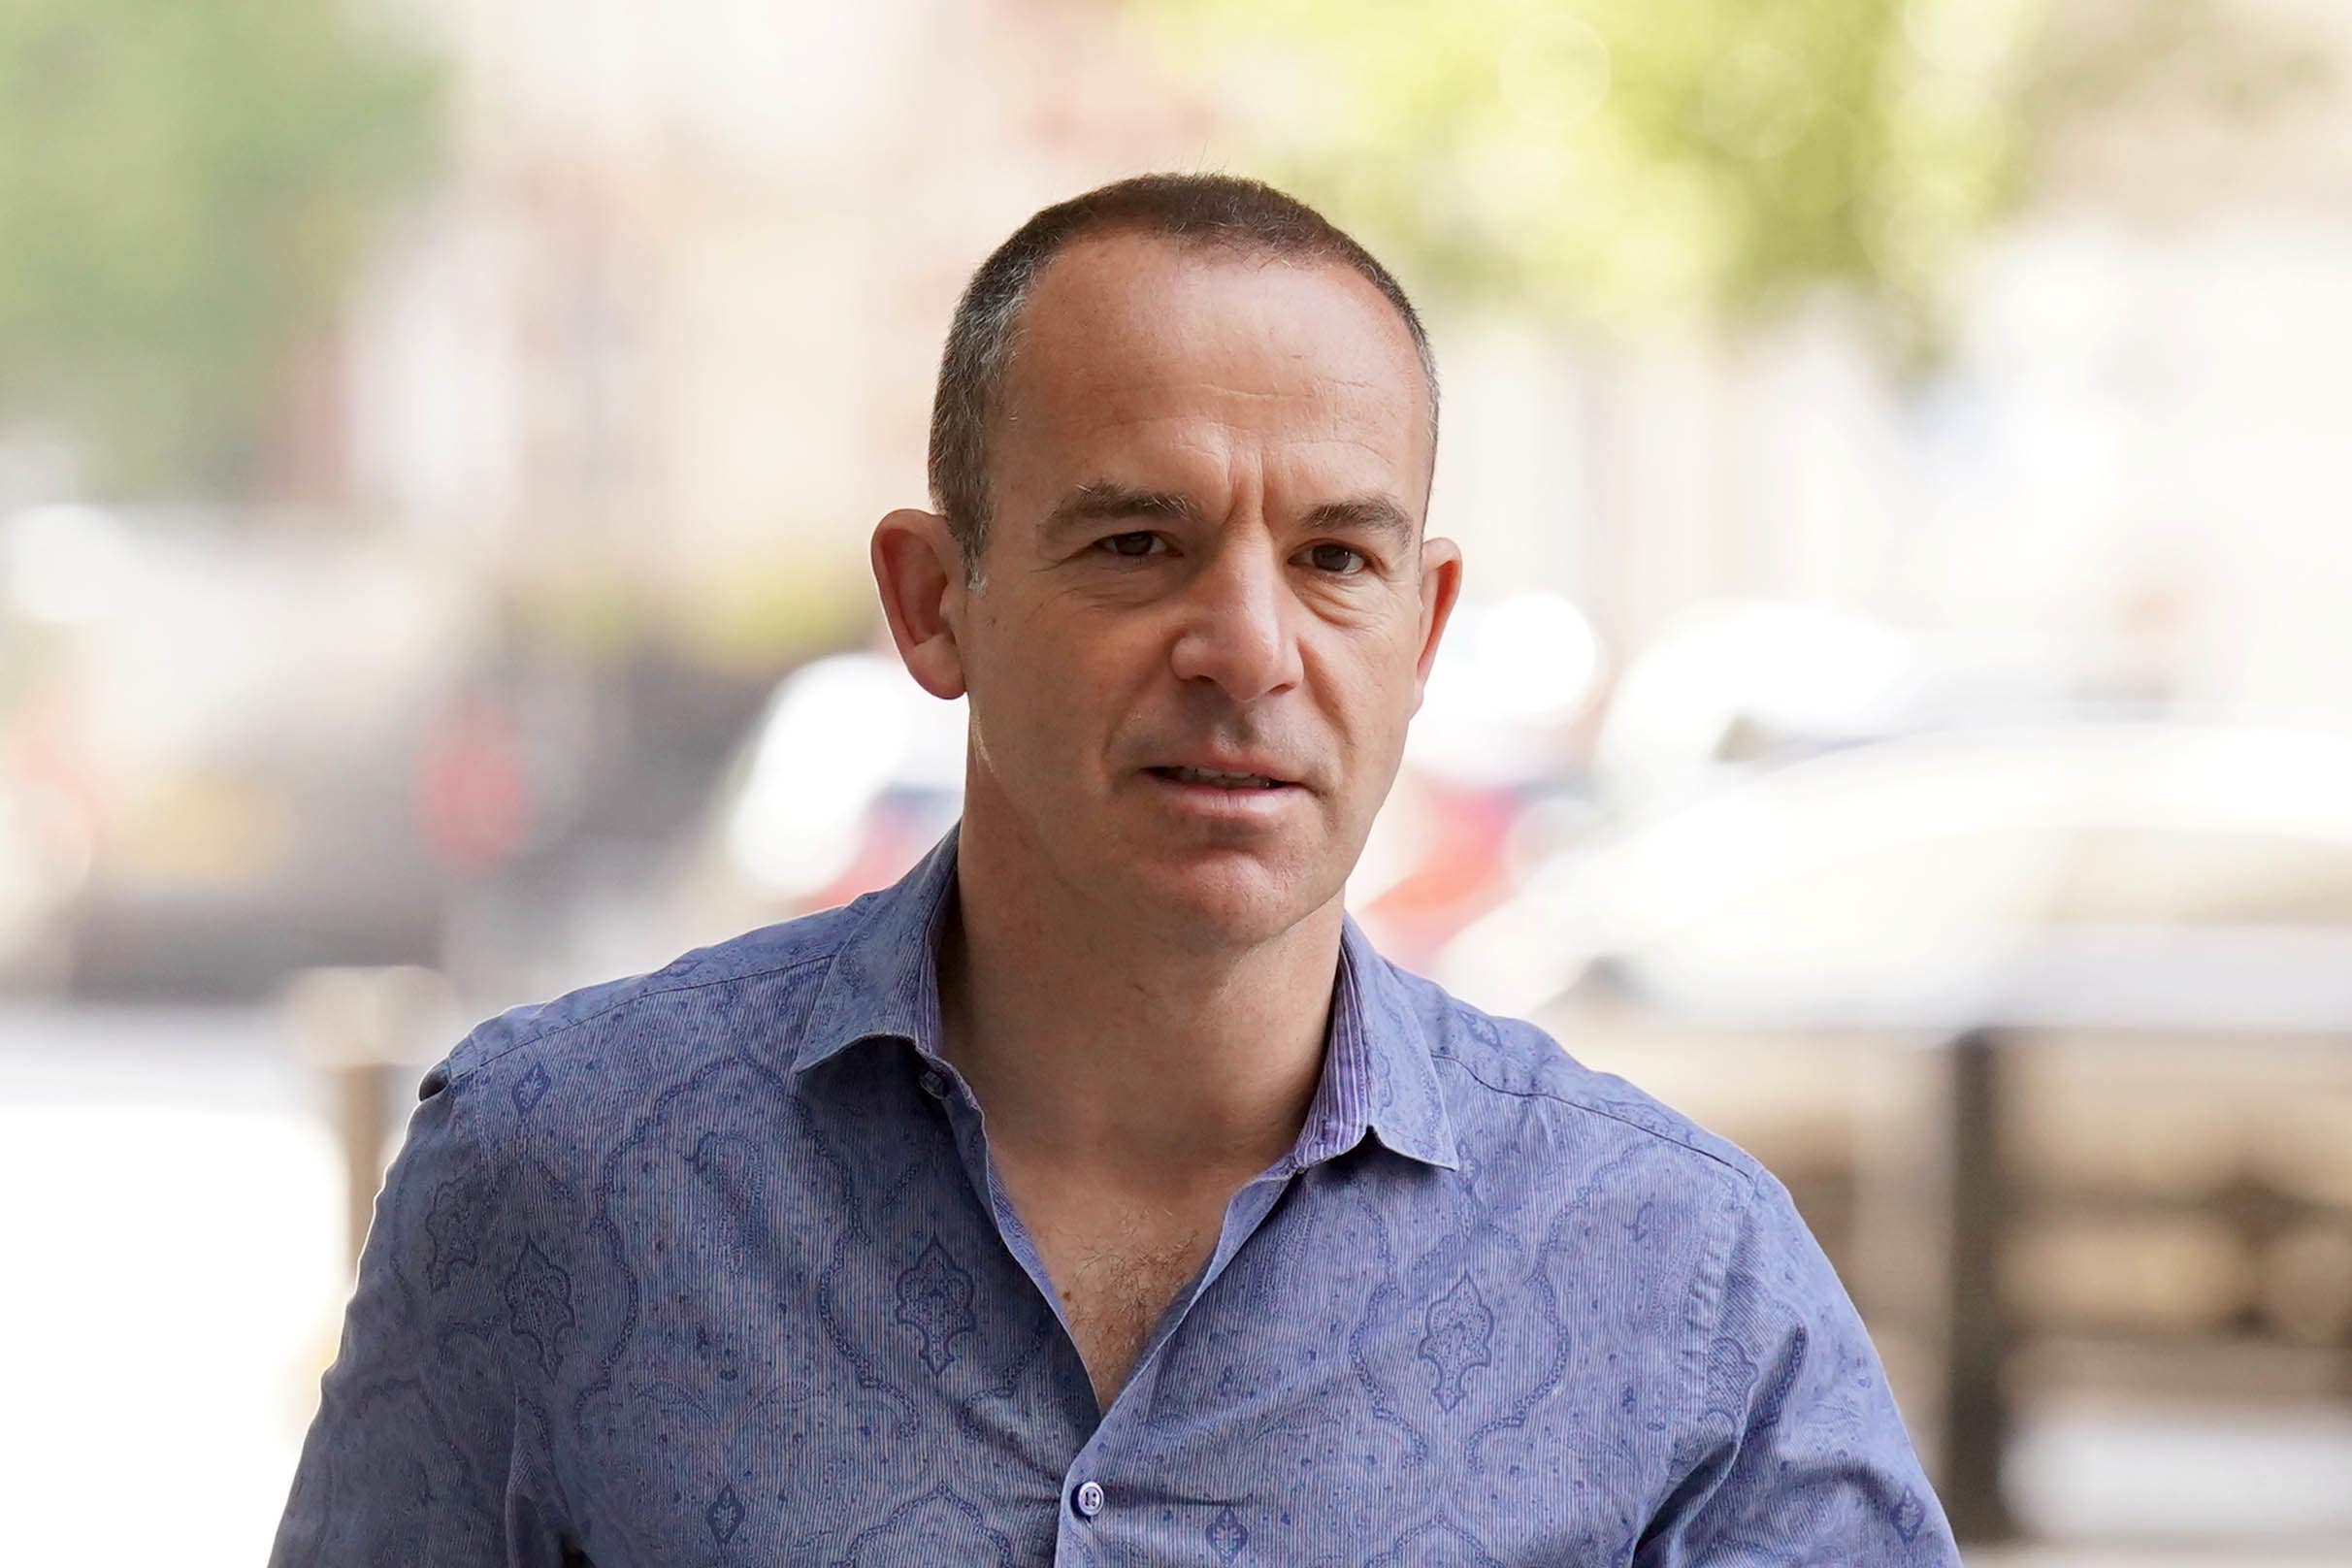 Martin Lewis says energy bill payers should submit readings in the next few days